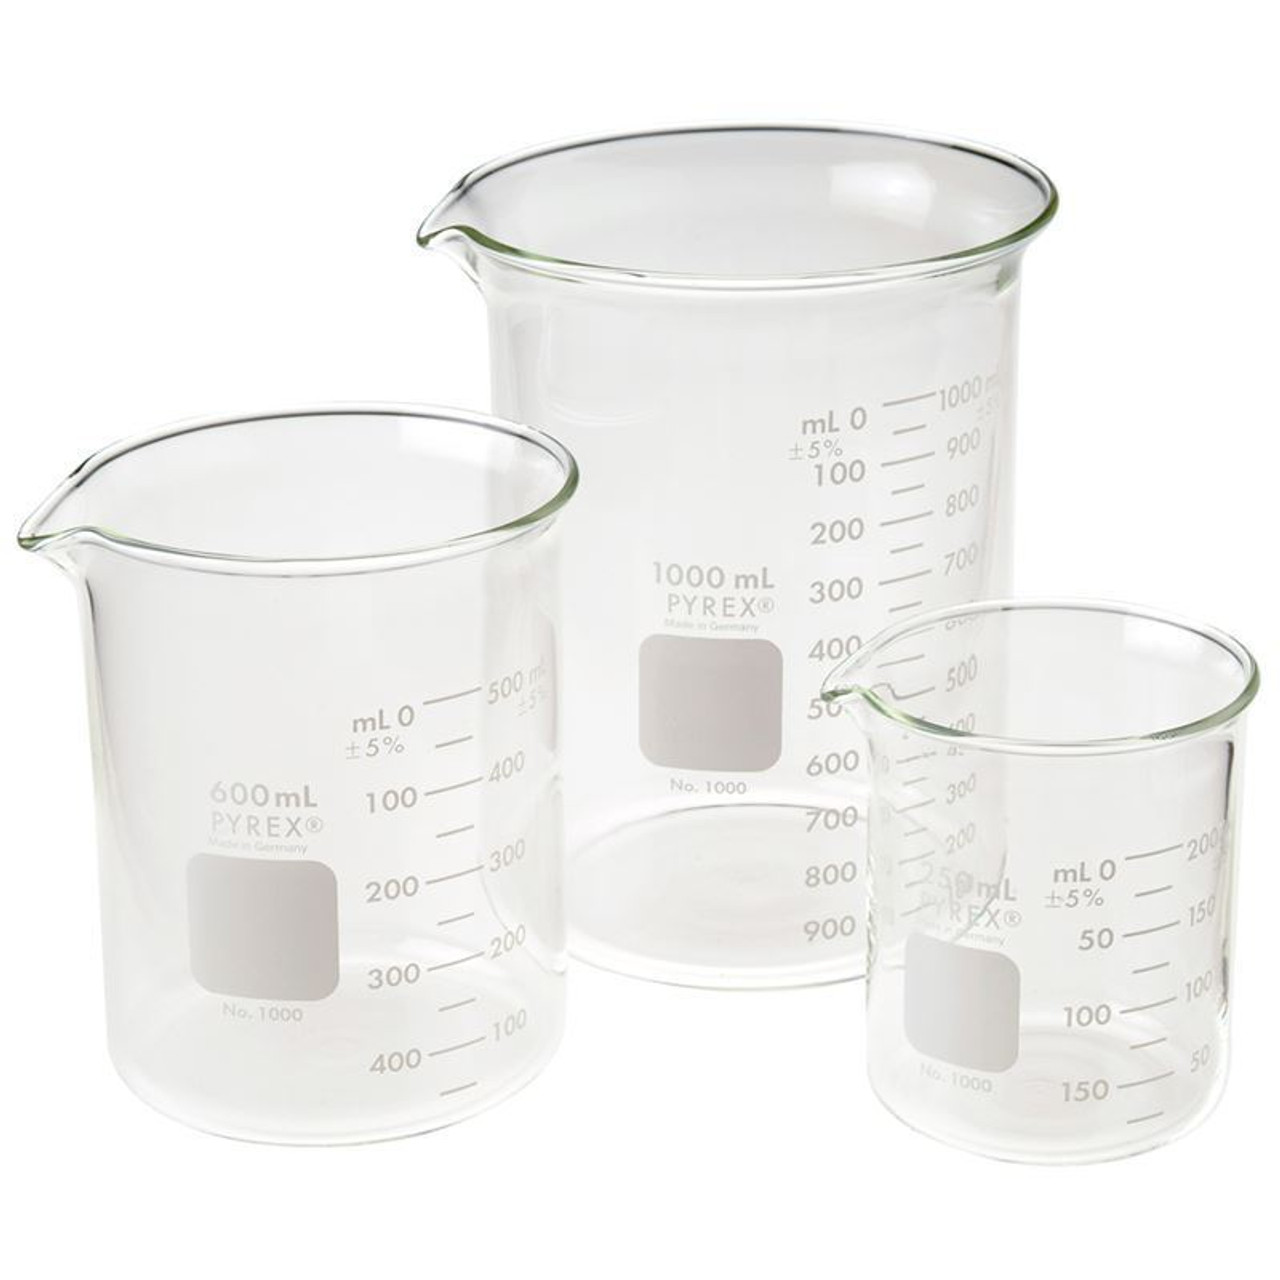 https://cdn11.bigcommerce.com/s-3yvzqa/images/stencil/1280x1280/products/1708/342714/0002947_beakers-griffin-low-form-double-scale-graduated-pyrex__43524.1693250095.jpg?c=2